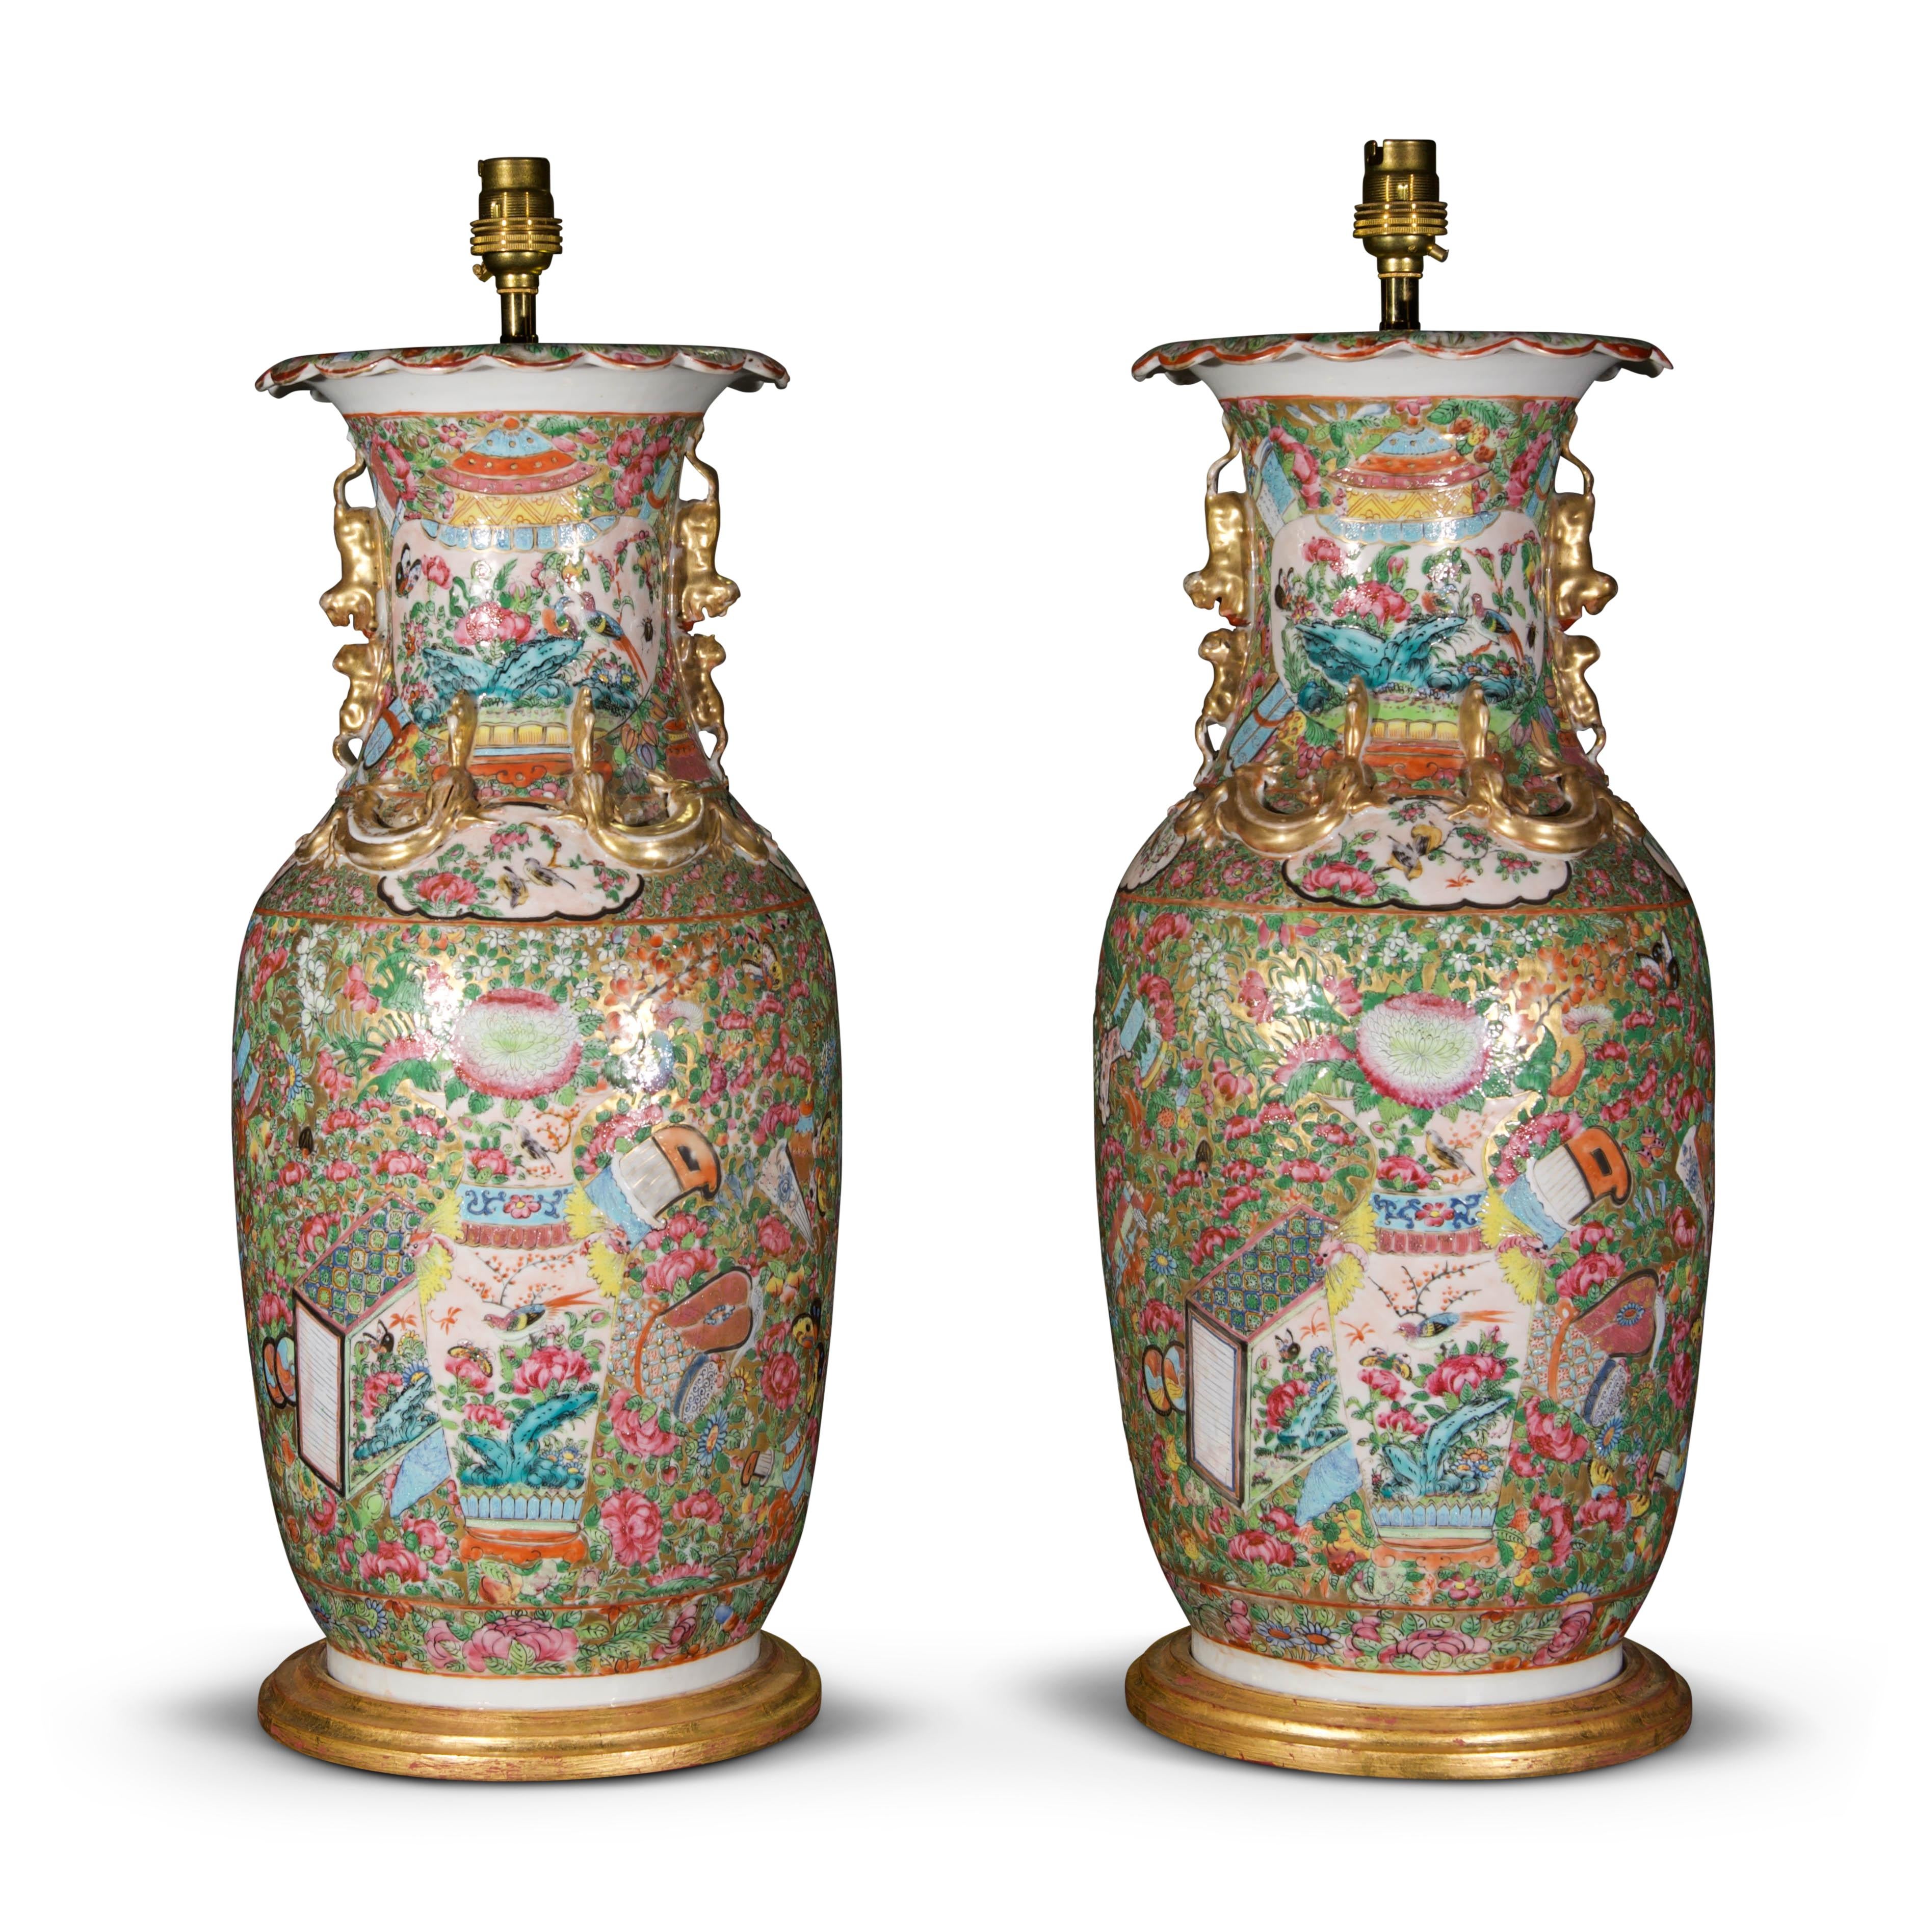 Pair of 19th Century Chinese Canton Baluster Porcelain Antique Table Lamps For Sale 1